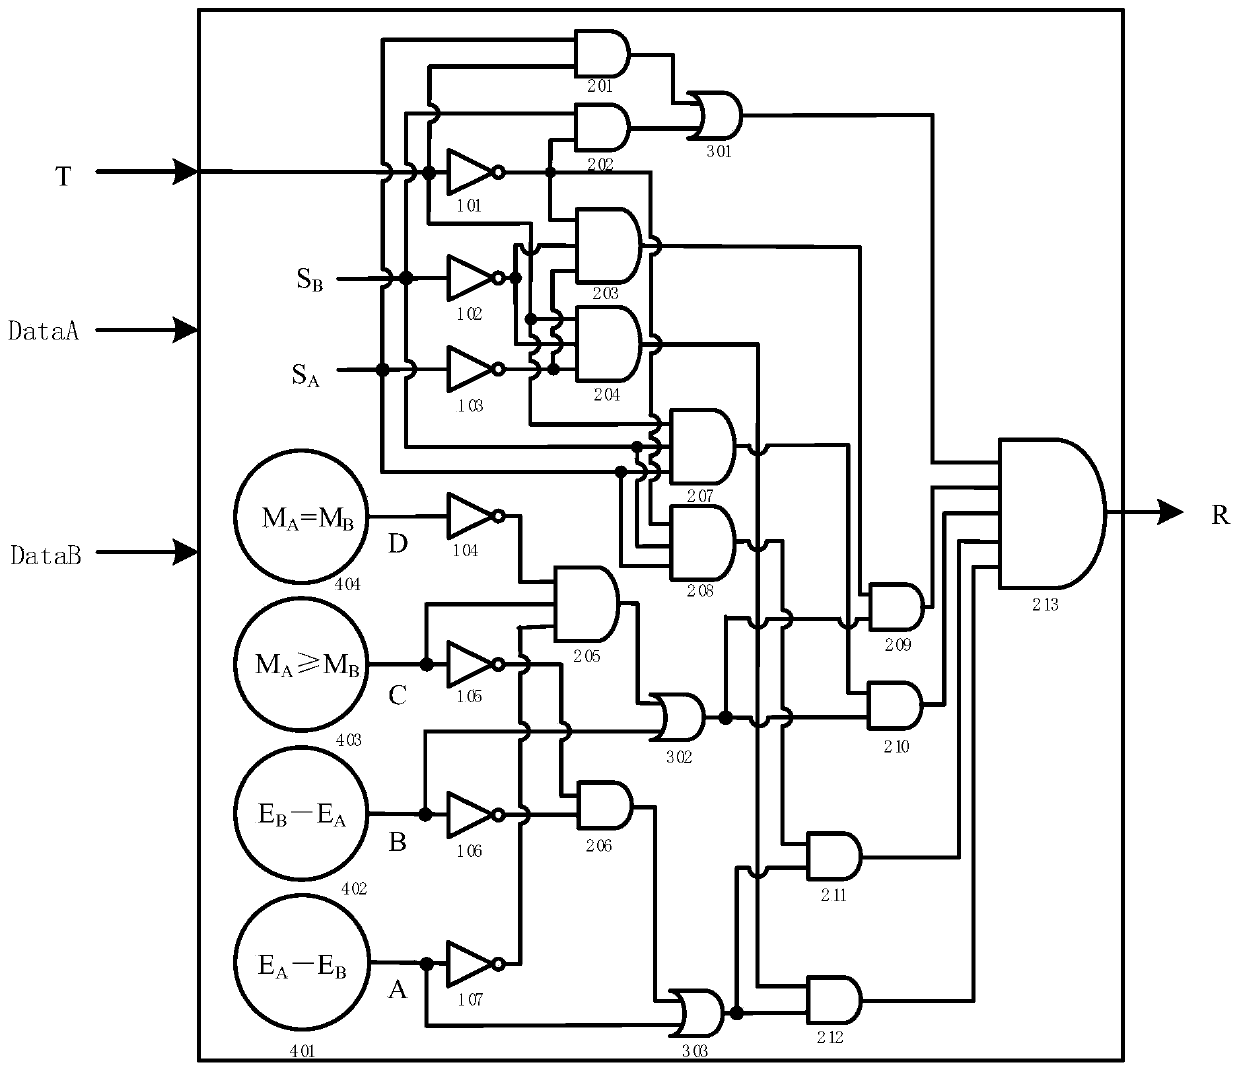 A Normalized Floating Point Data Screening Circuit